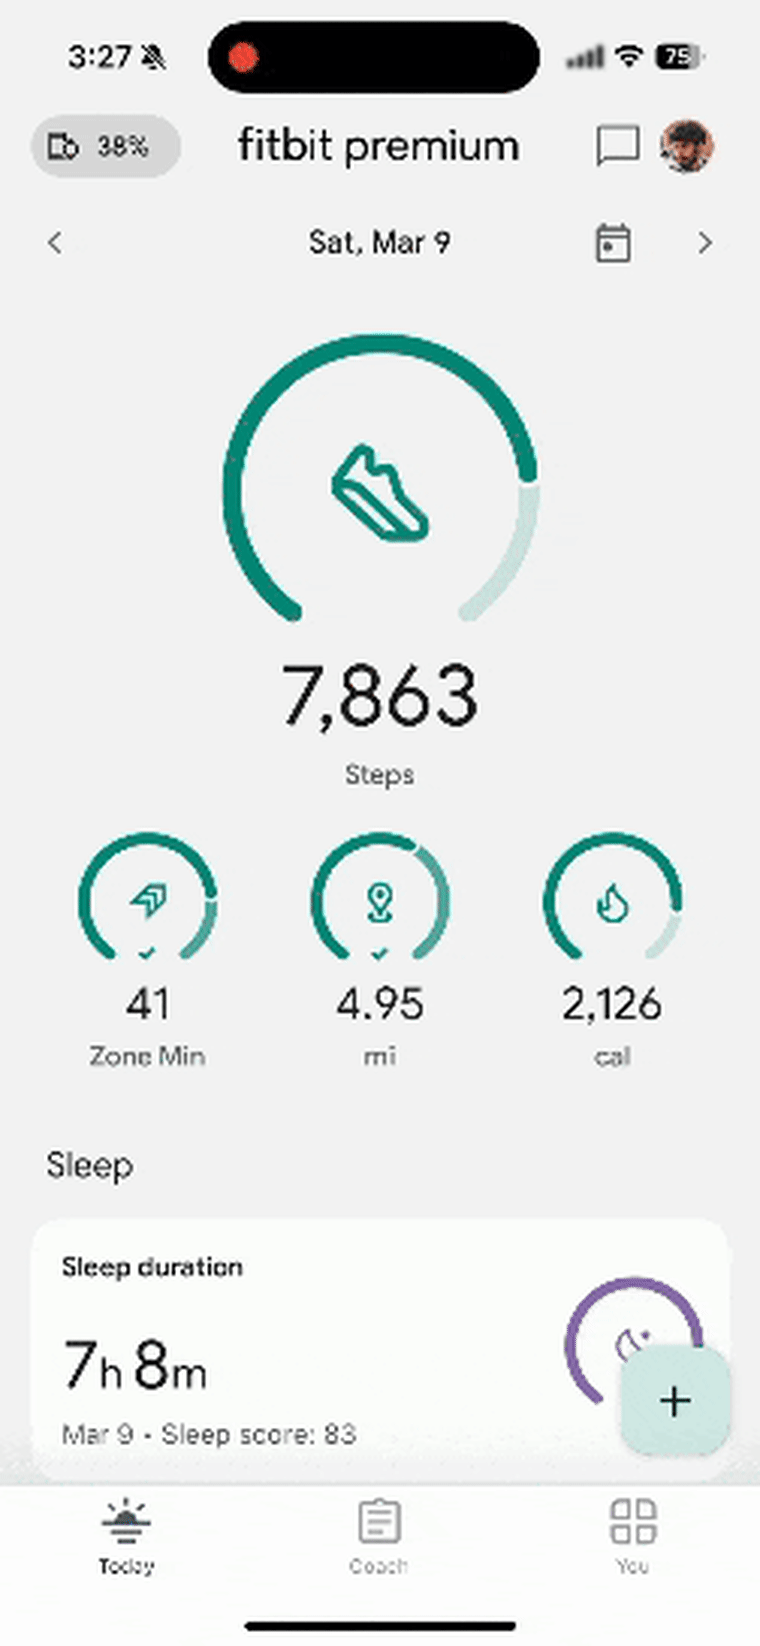 The Fitbit app is simple and clean. Tapping a specific data point, like steps, for example, usually opens a chart or graph, giving you more of a breakdown about your step count.